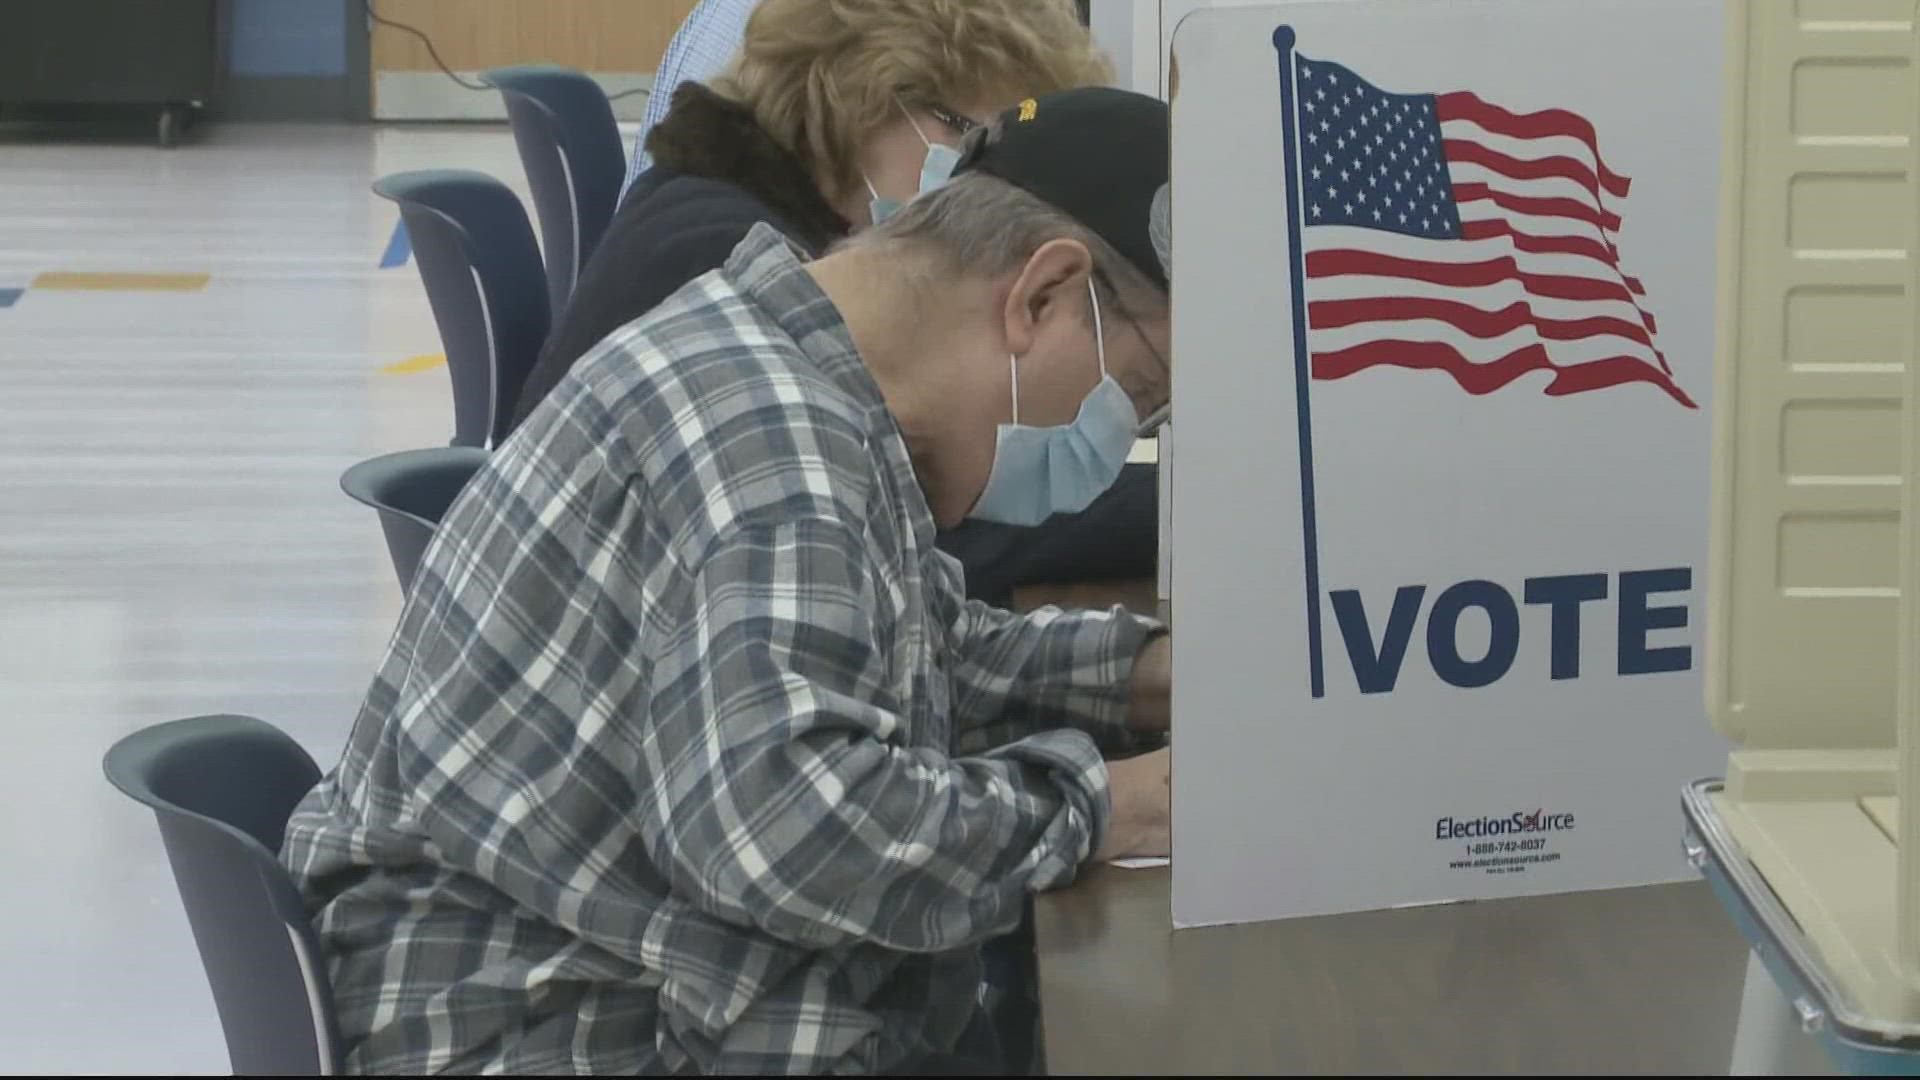 The Board of Elections did not say whether the uncounted ballots could impact election results.